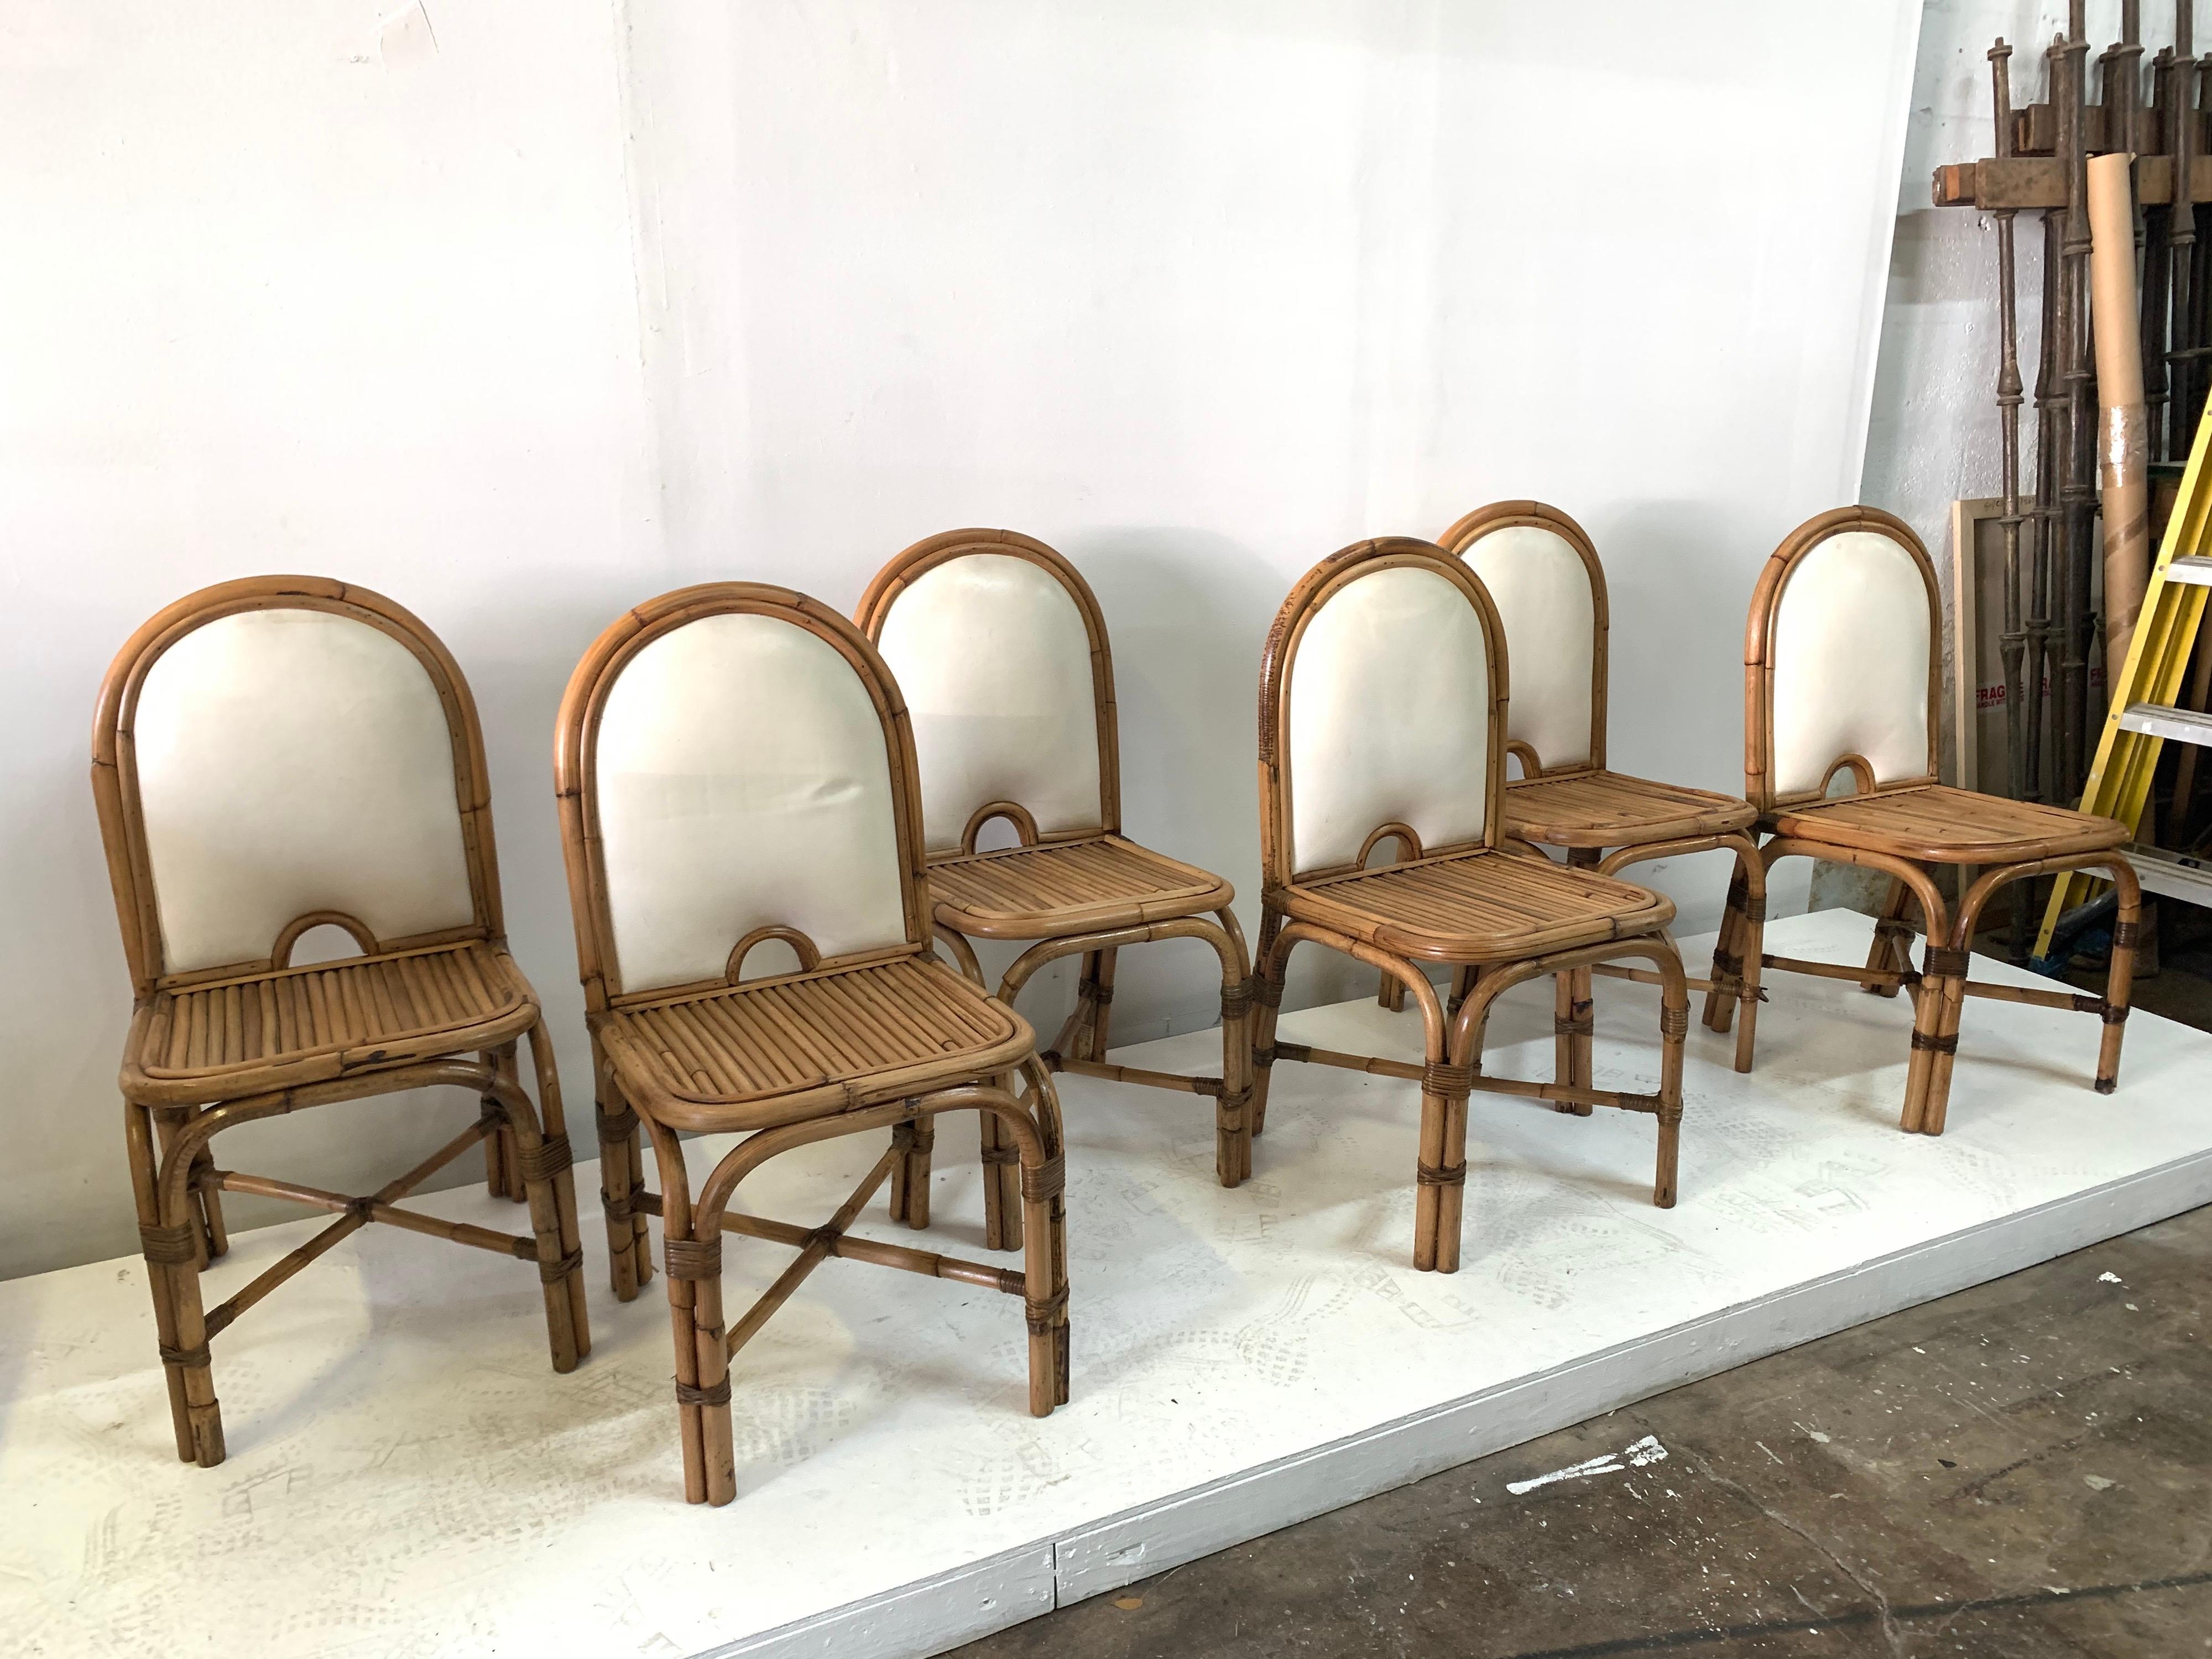 Great original vintage condition, this set has 6 armless chairs. Of the 6 chairs 3 have the brass Gabriella Crespi signature plaque on the back (see detail images). The design is from the Rising Sun series designed and produced in Italy in 1970's.